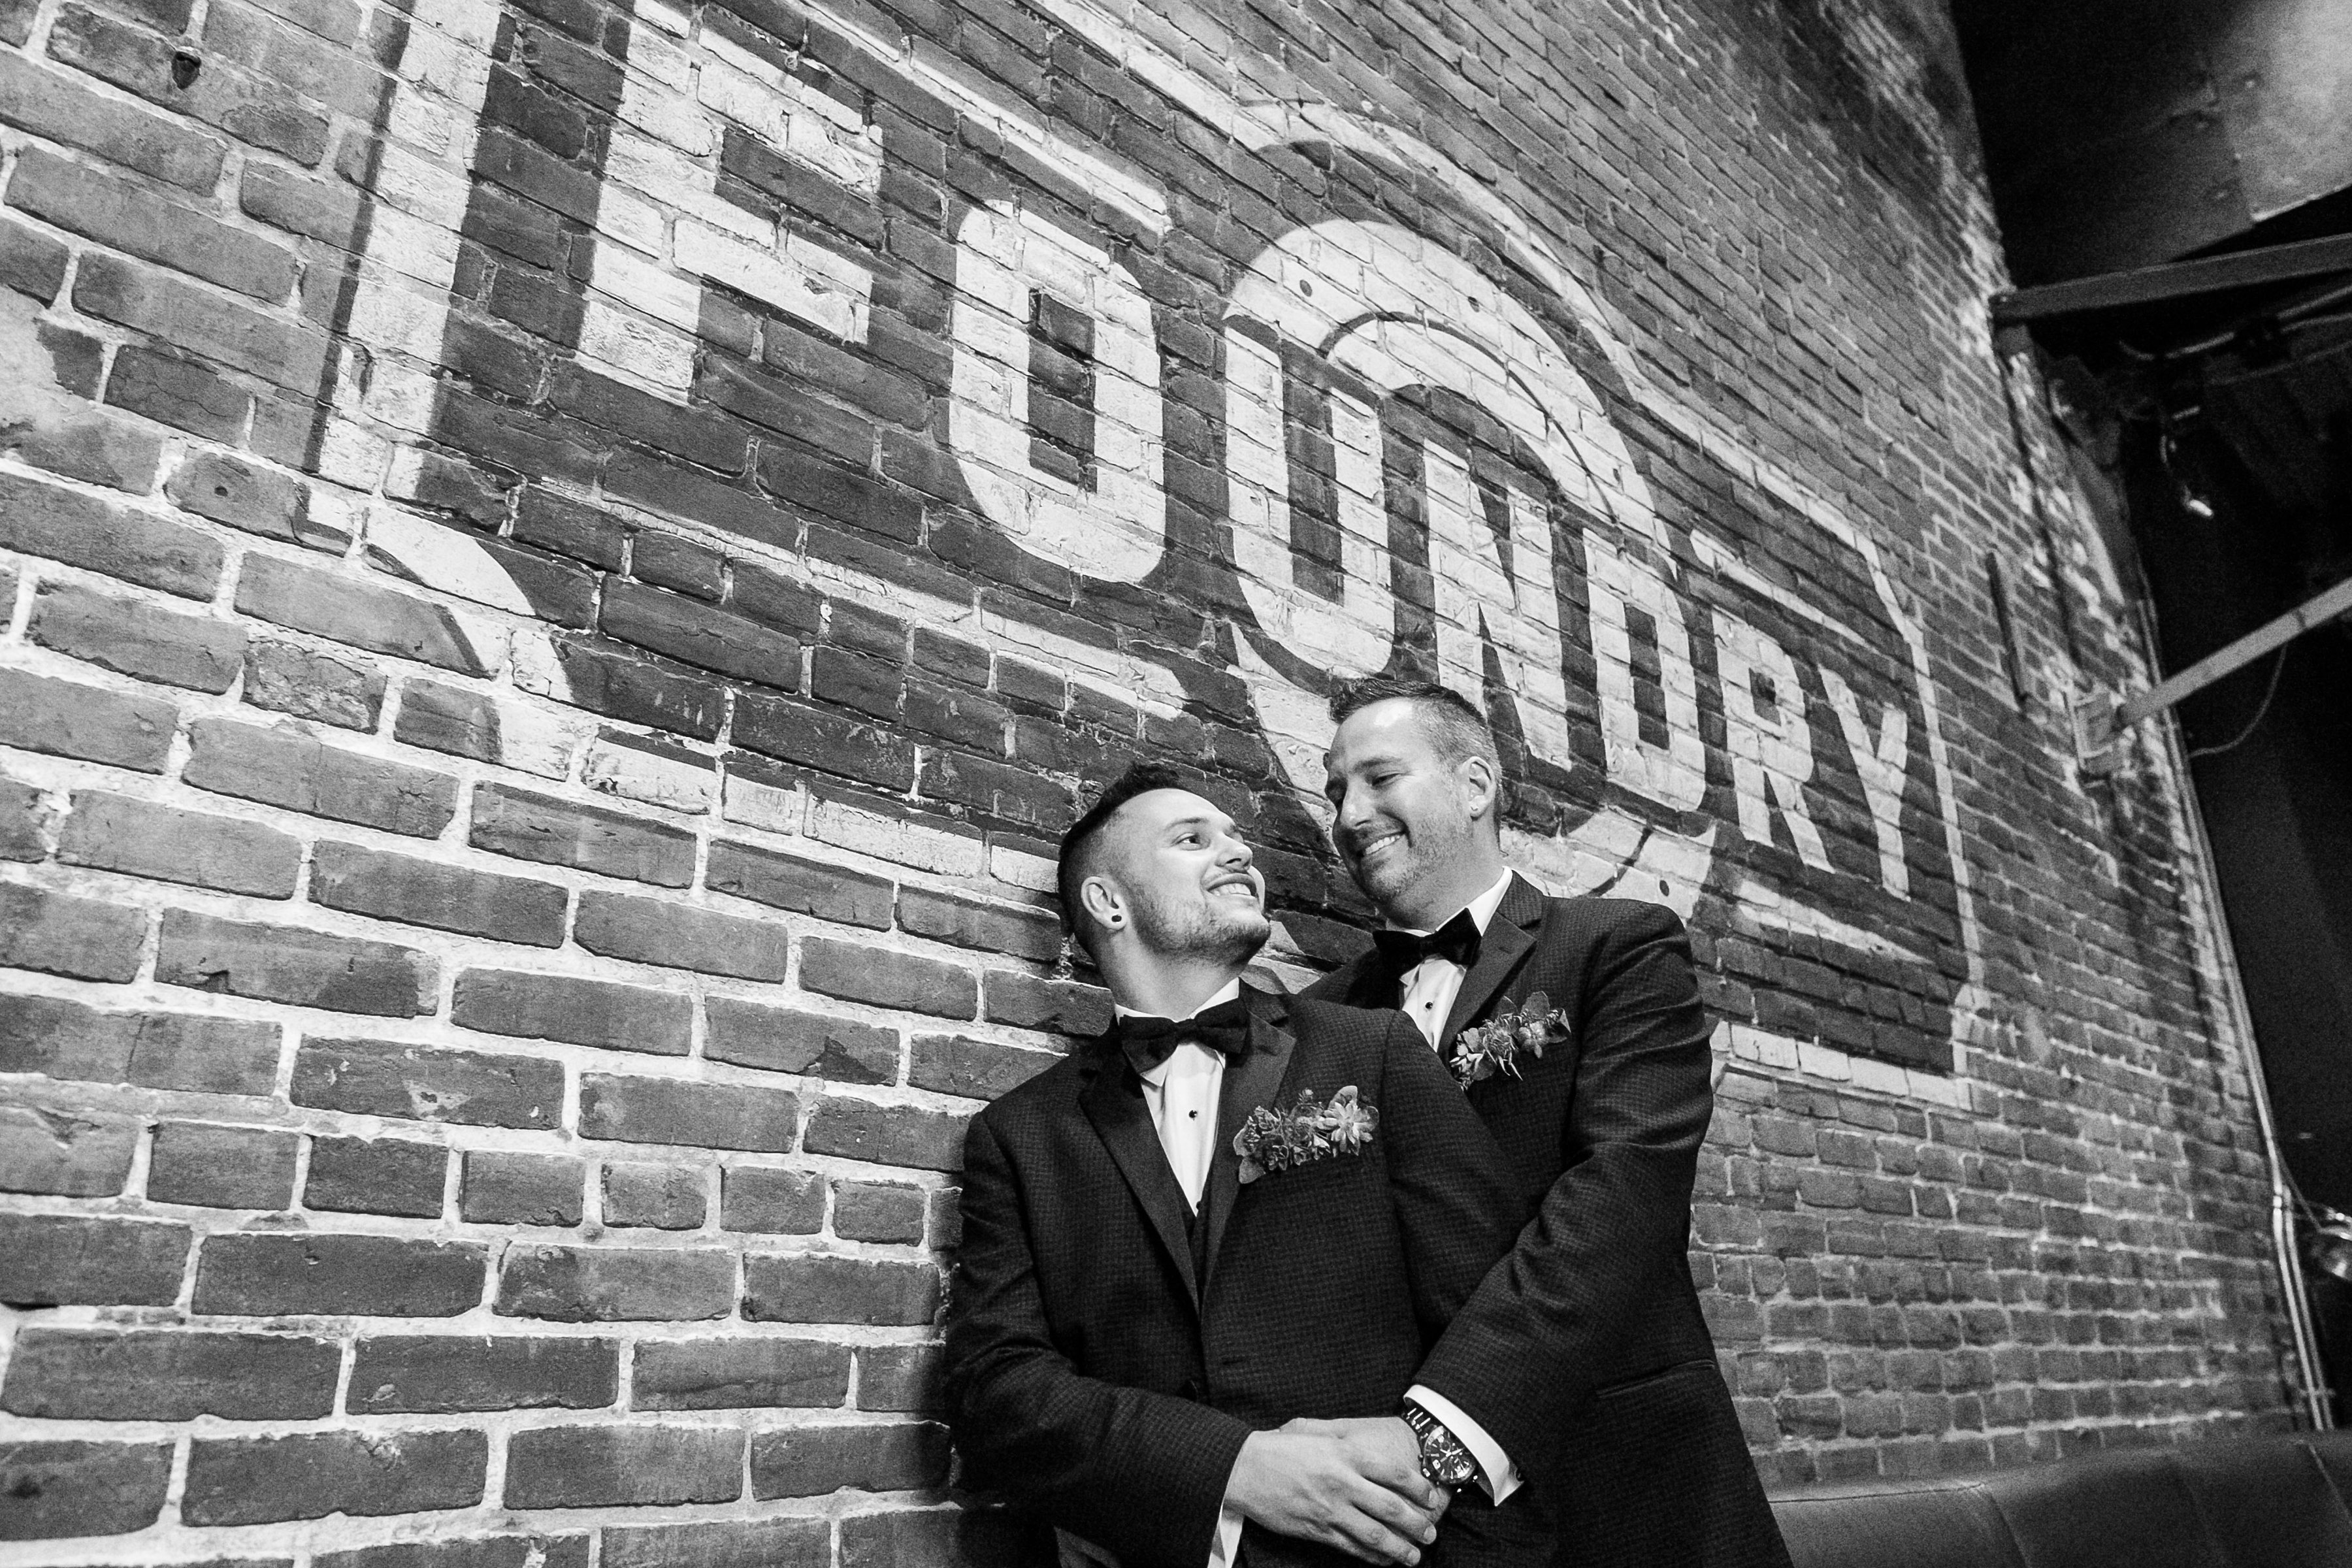 Two men in tuxedos smile lovingly at each other on their wedding day at Live Nation Special Events’ The Fillmore Philadelphia